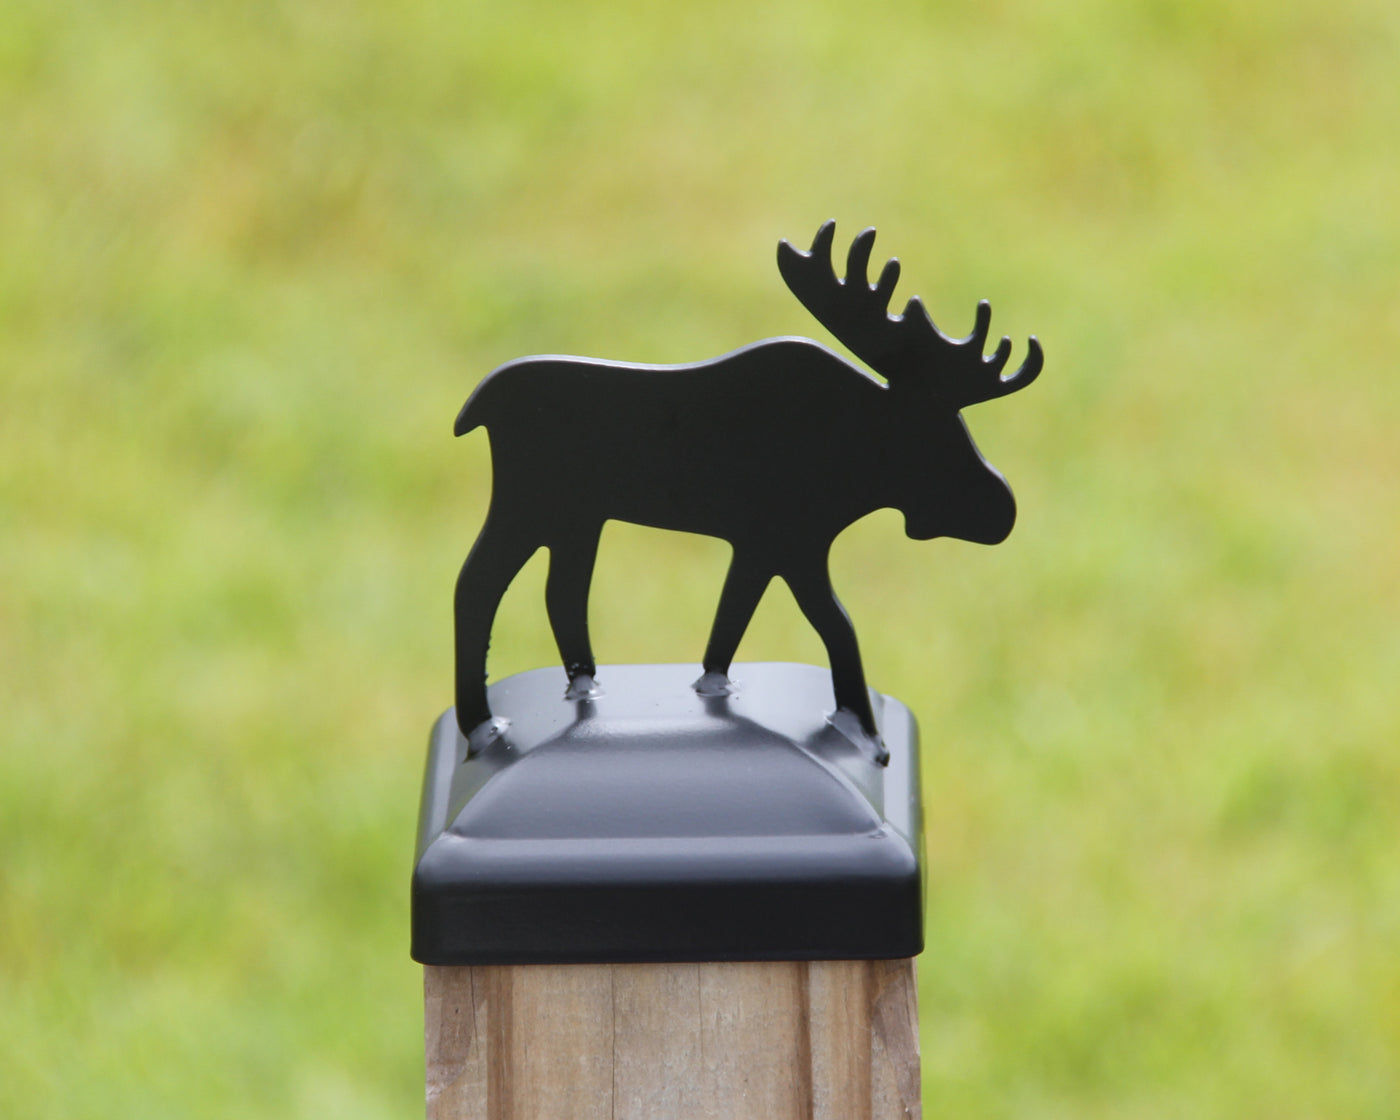 4x4 Moose Post Cap - Madison Iron and Wood - Post Cap - metal outdoor decor - Steel deocrations - american made products - veteran owned business products - fencing decorations - fencing supplies - custom wall decorations - personalized wall signs - steel - decorative post caps - steel post caps - metal post caps - brackets - structural brackets - home improvement - easter - easter decorations - easter gift - easter yard decor